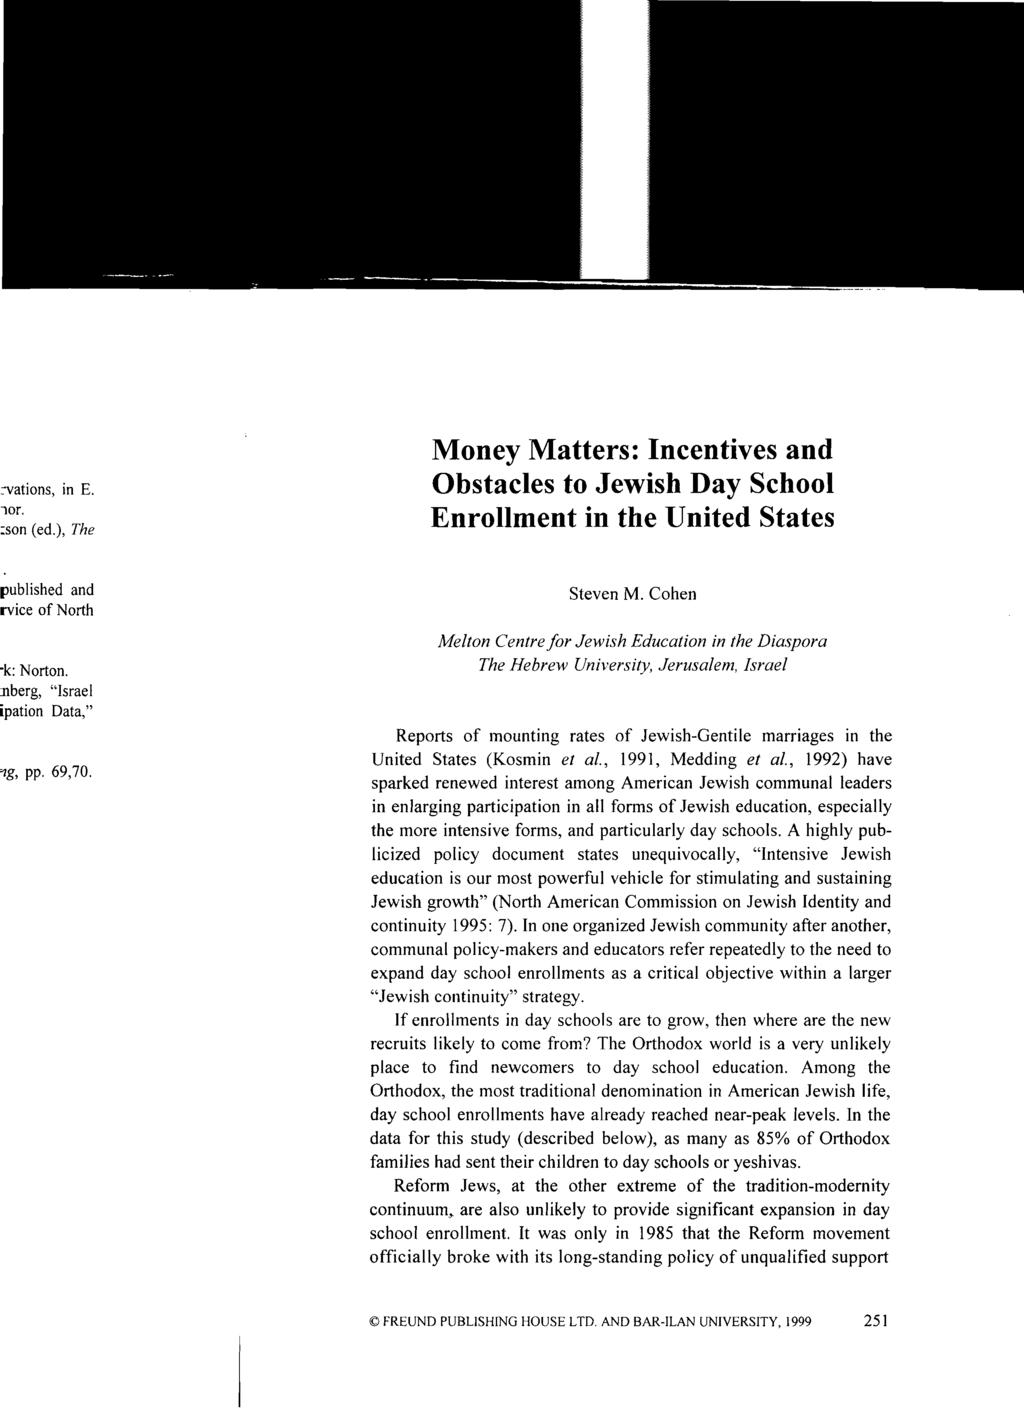 Money Matters: Incentives and Obstacles to Jewish Day School Enrollment in the United States Steven M.